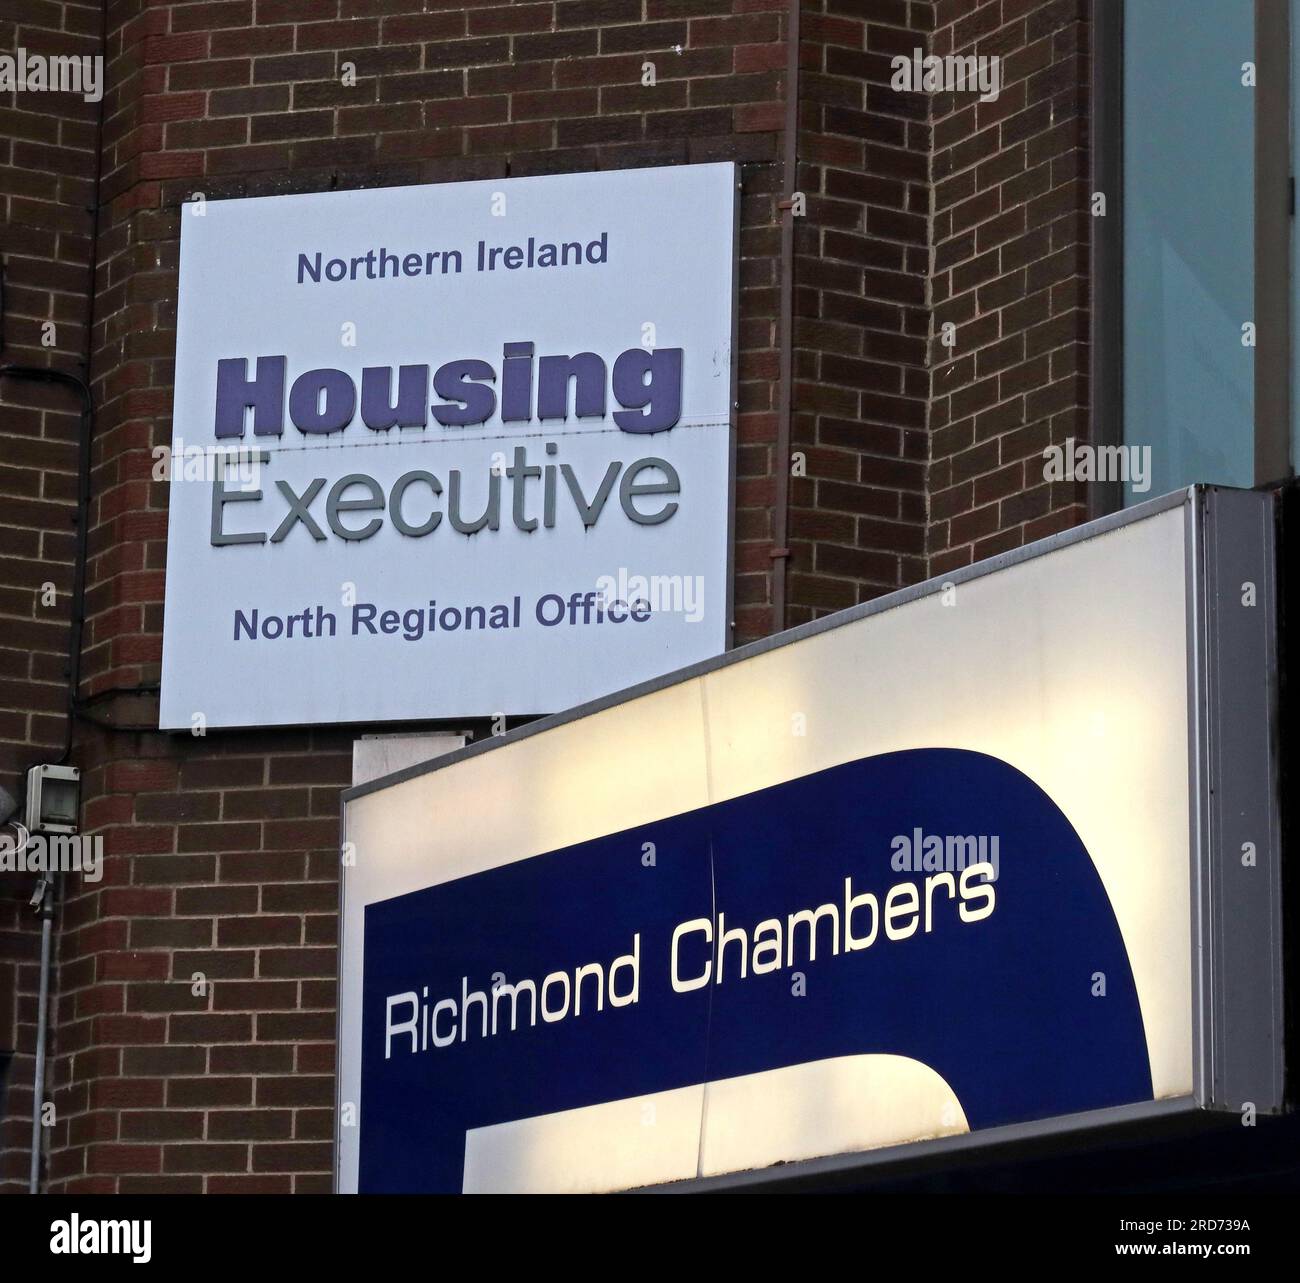 Richmond Chambers Housing Executive Office, Northern Ireland North Regional Office, The Diamond, Derry, Co Londonderry, Irlanda del Nord, REGNO UNITO, BT48 6QP Foto Stock